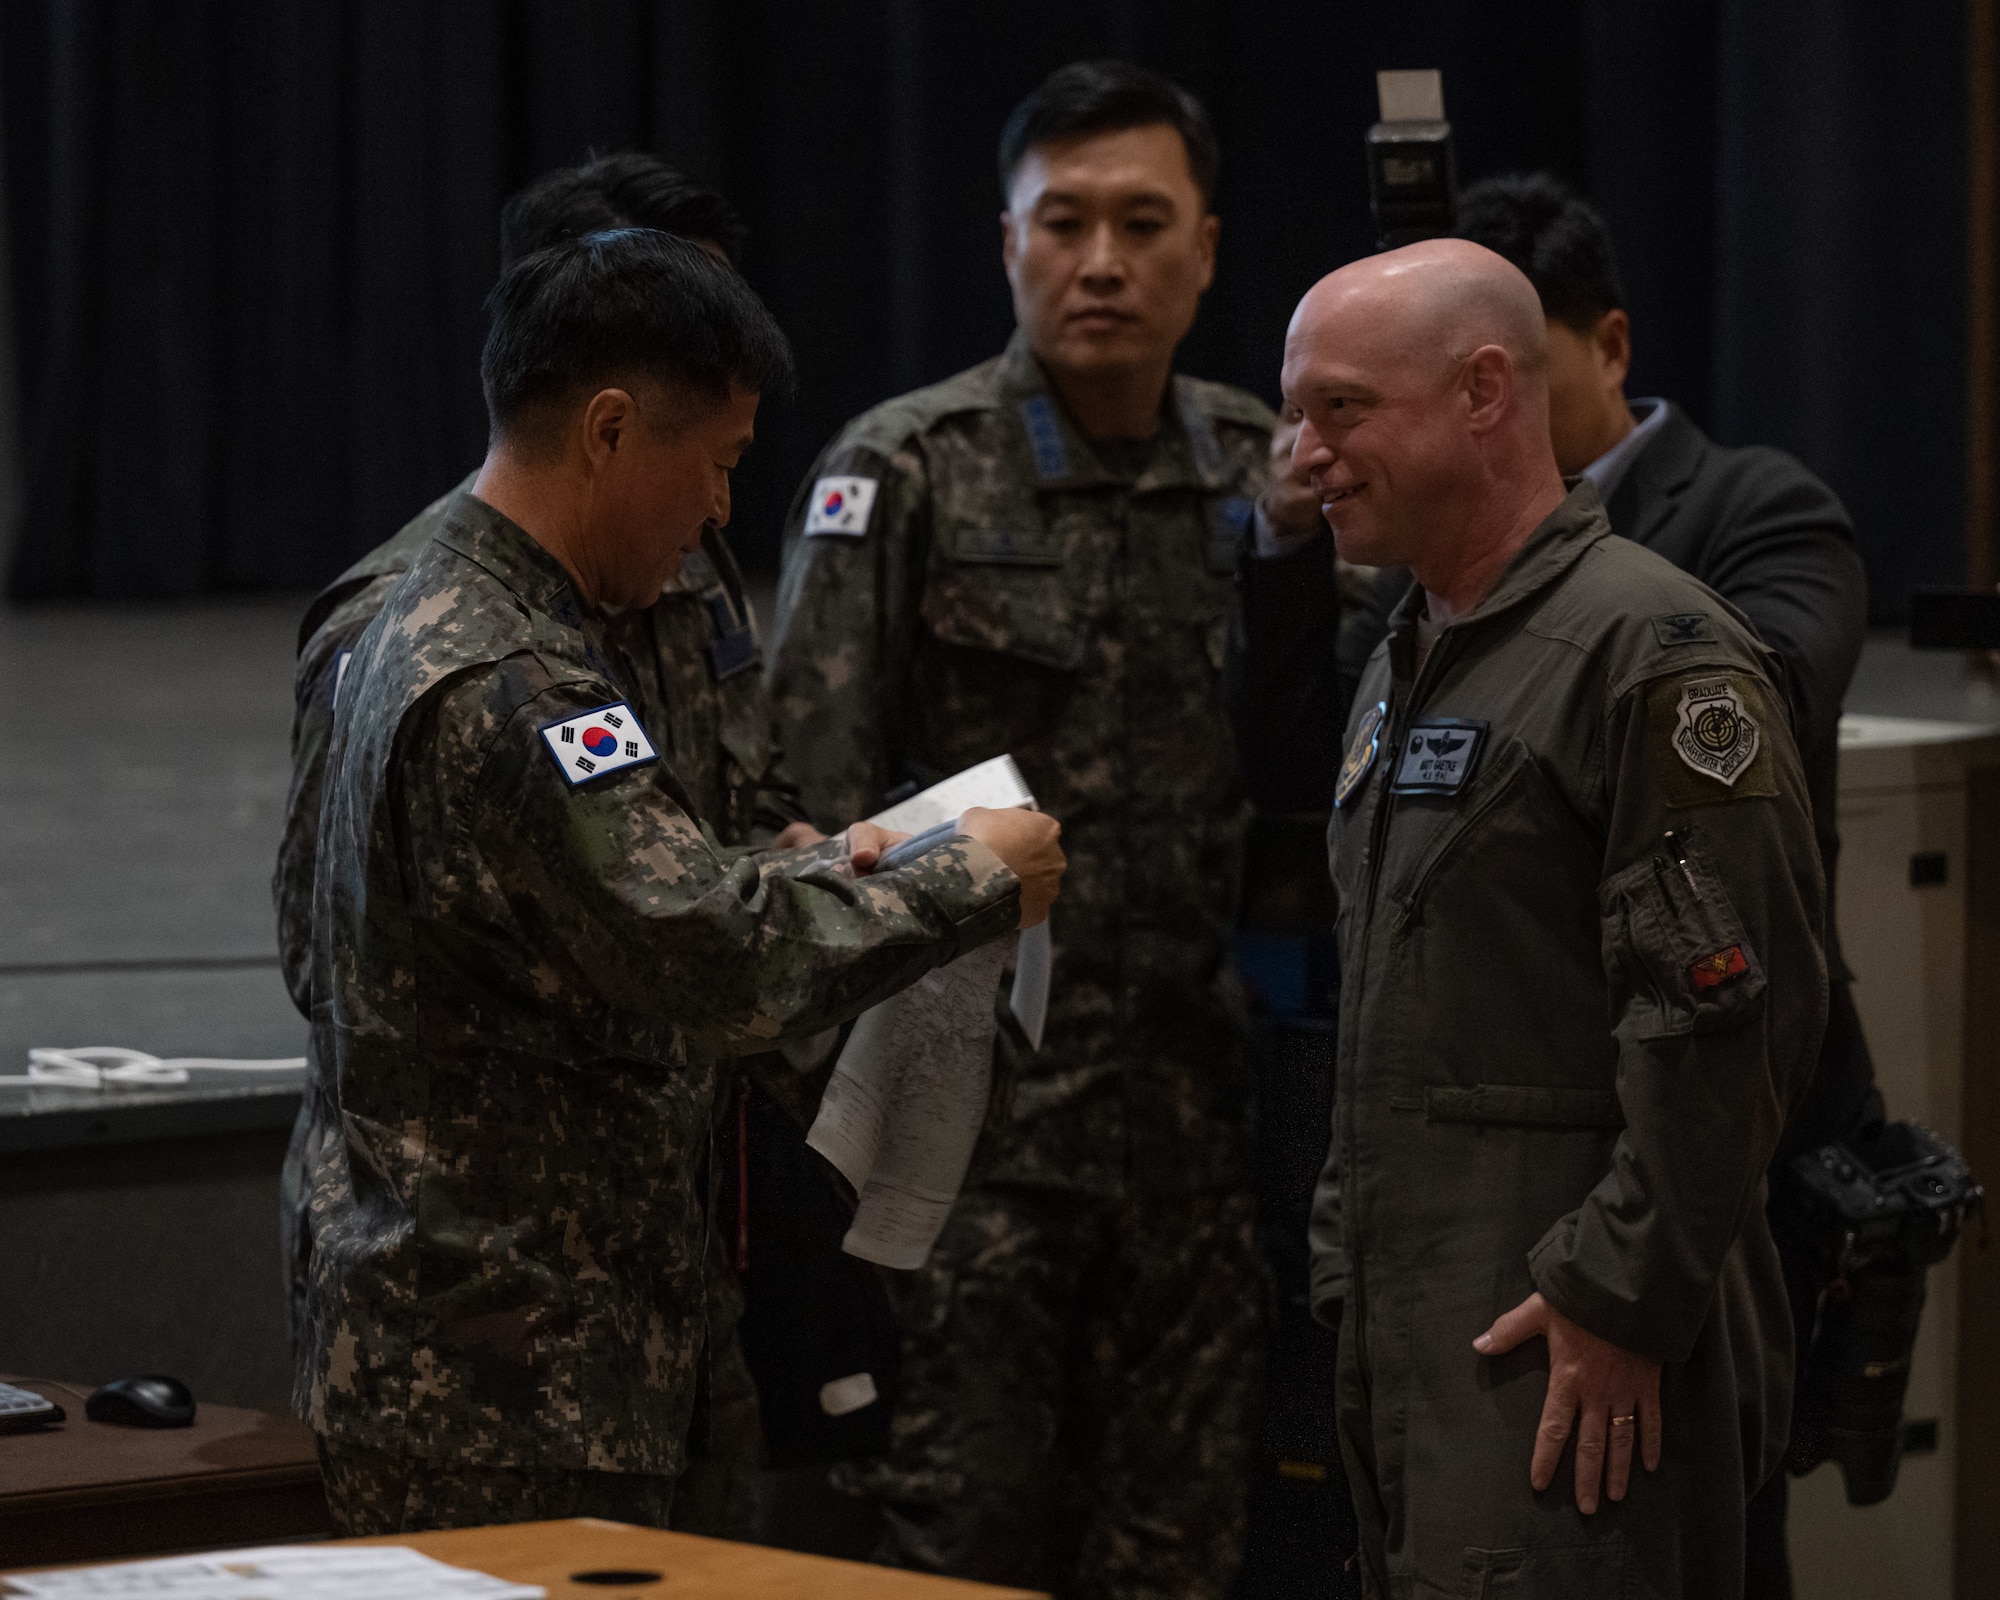 Republic of Korea Air Force Chief of Staff Gen. Lee, Young Su presents a gift to U.S. Air Force Col. Matthew Gaetke, 8th Fighter Wing commander, during his visit to Kunsan Air Base, ROK